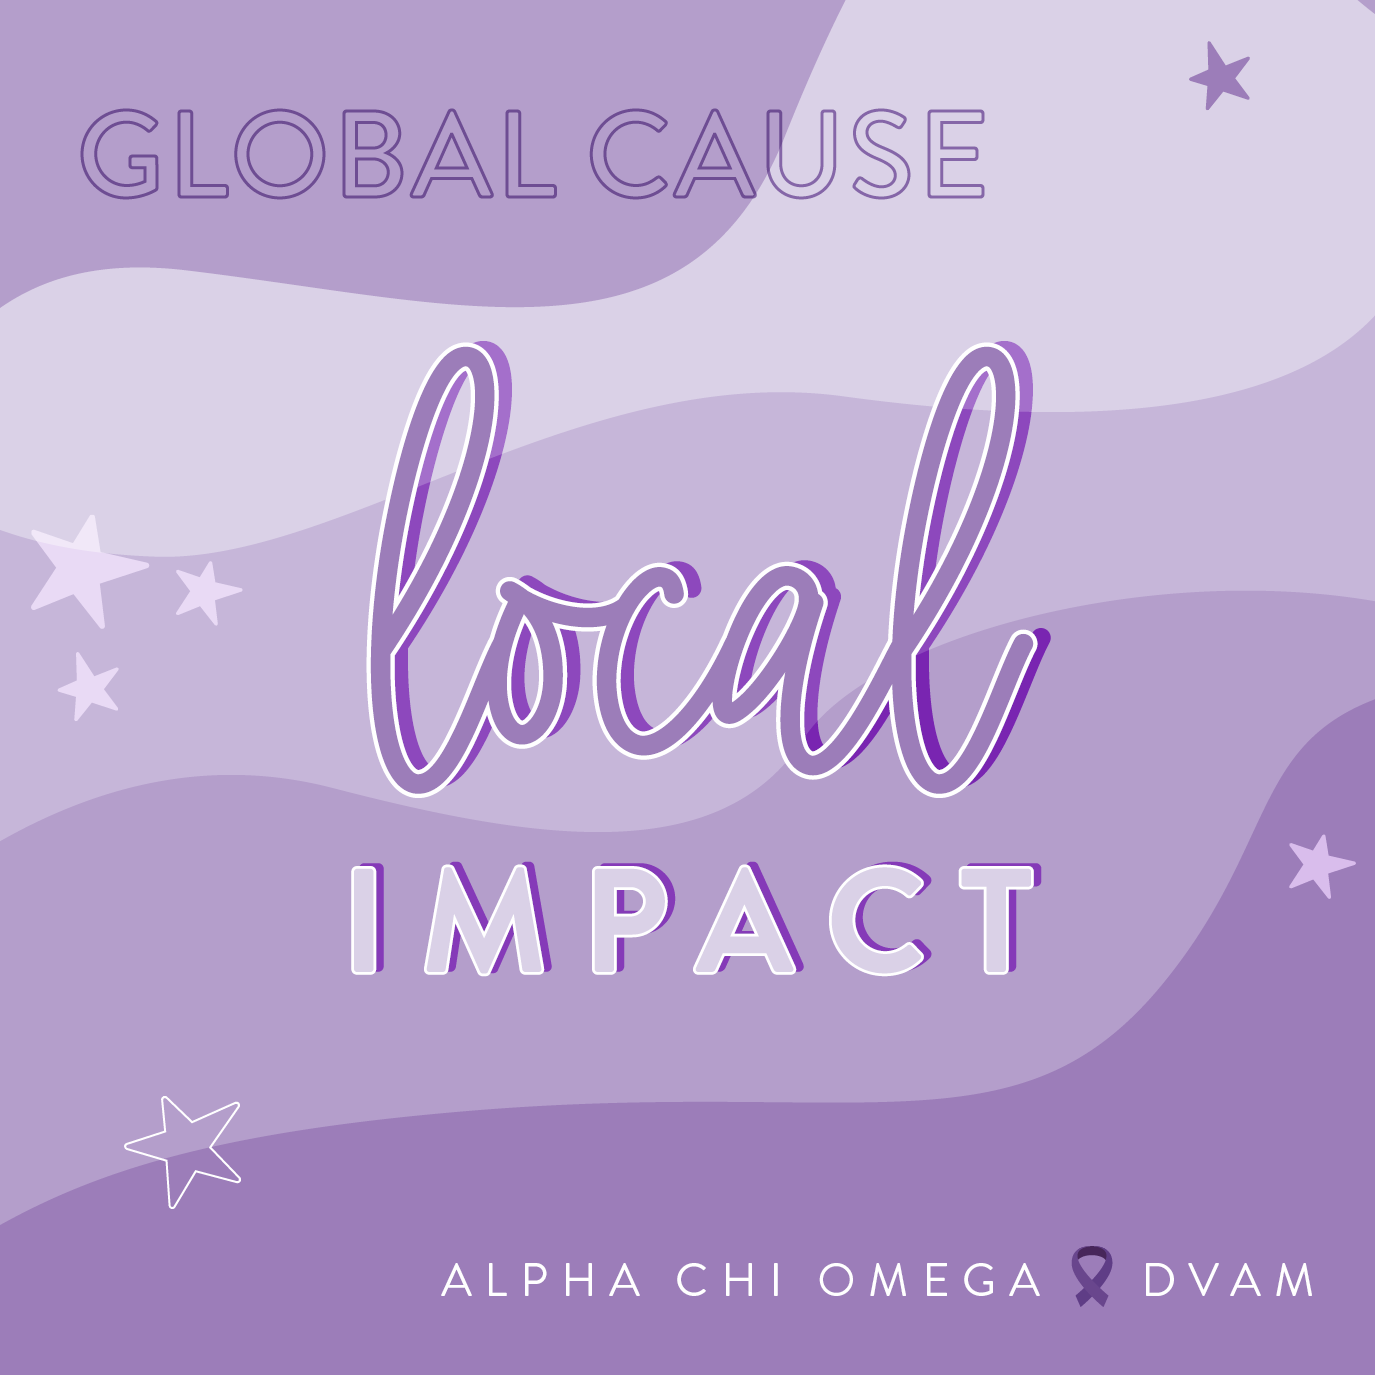 Global Cause, Local Impact